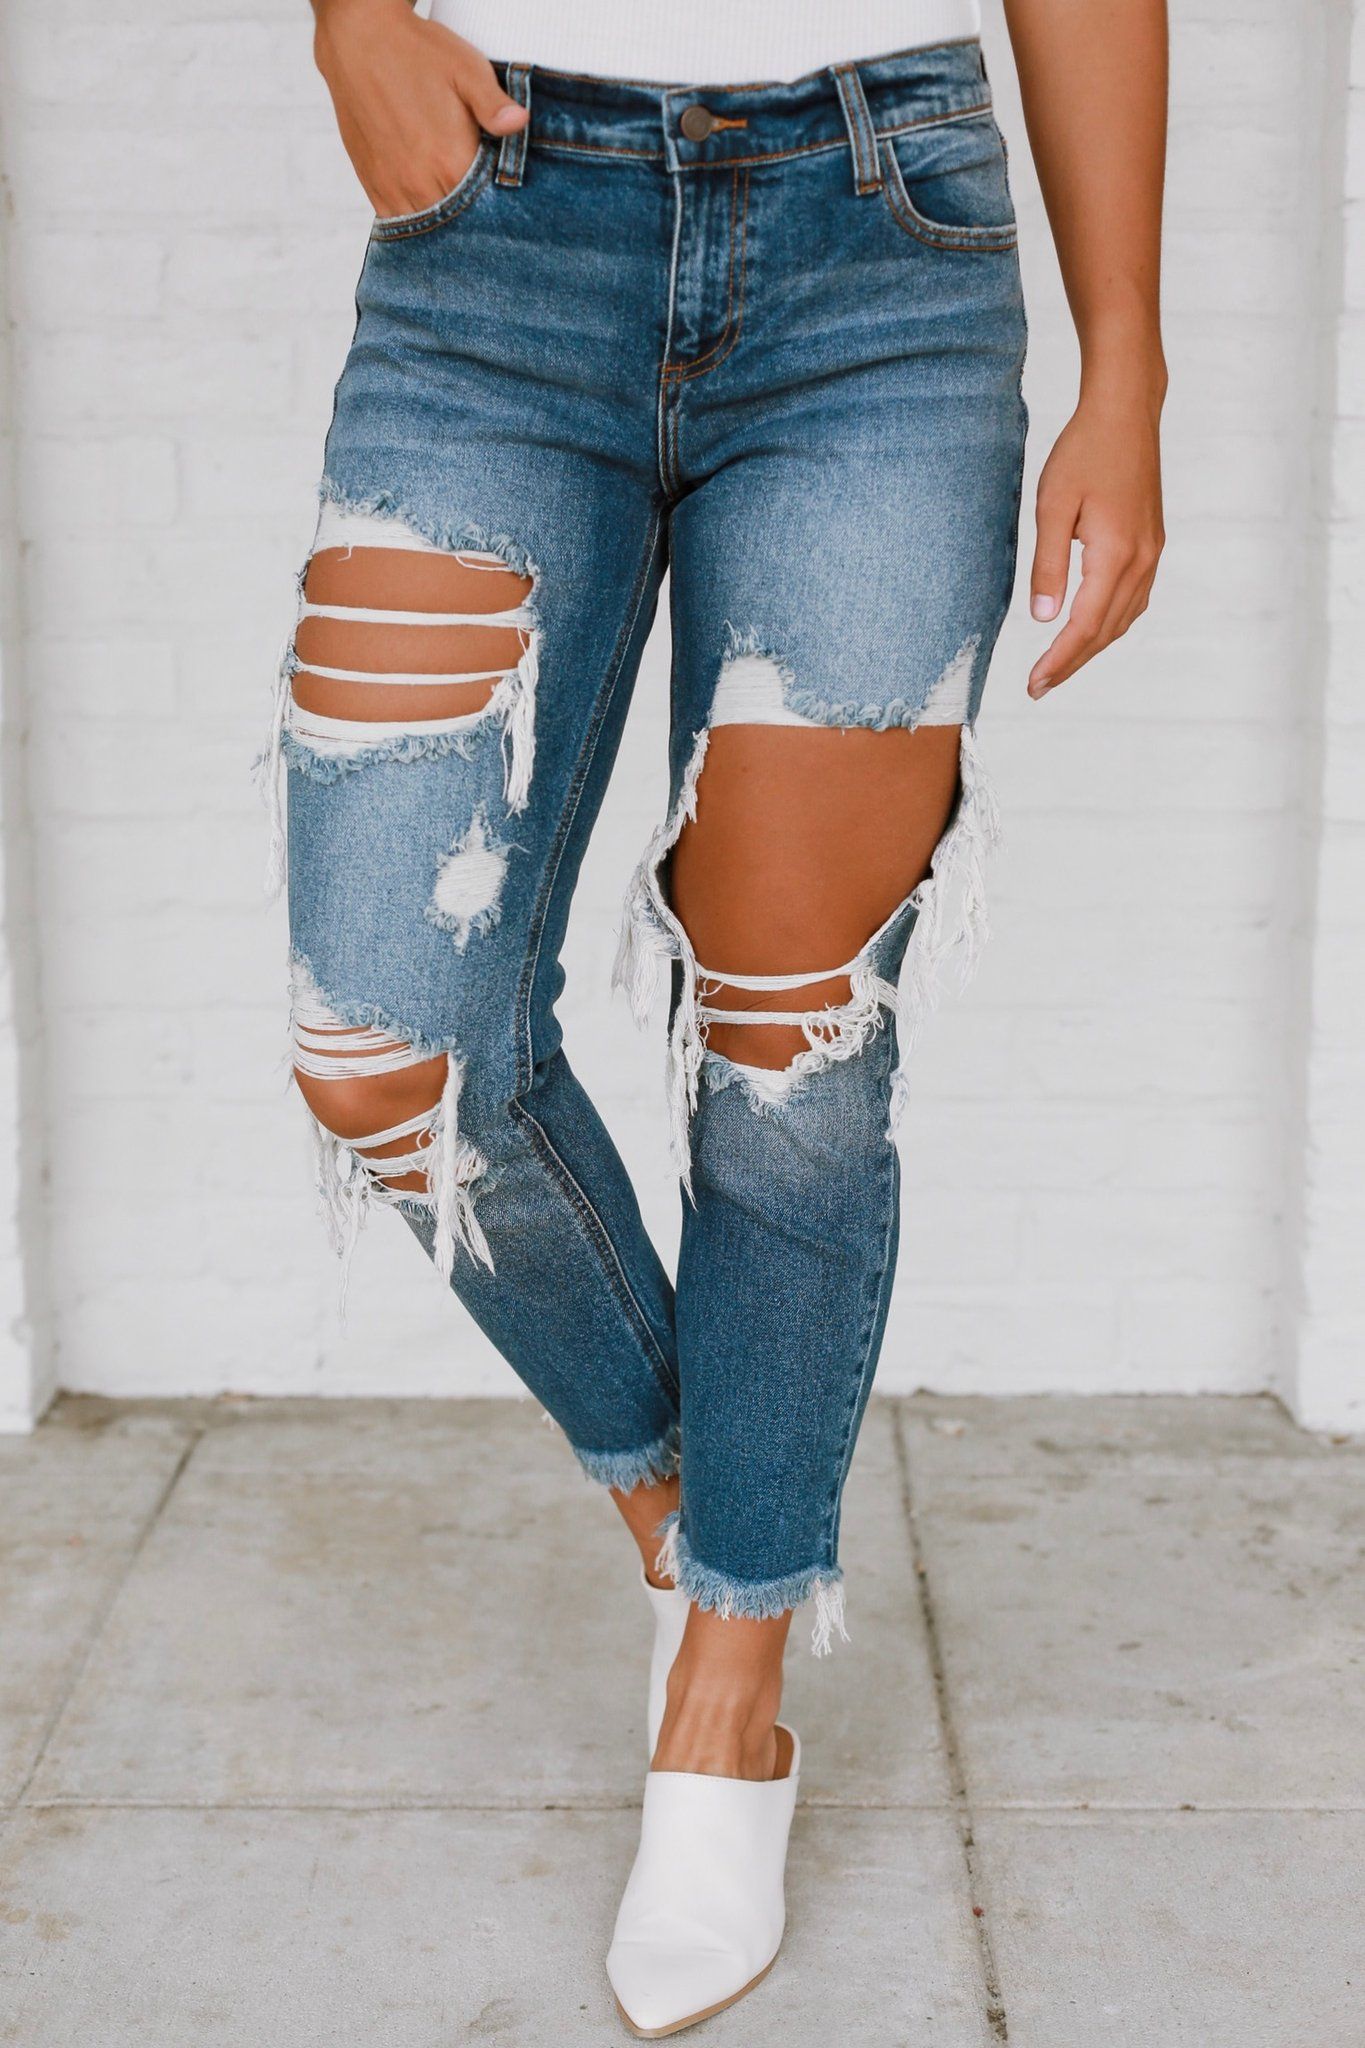 Distressed Jeans For Women